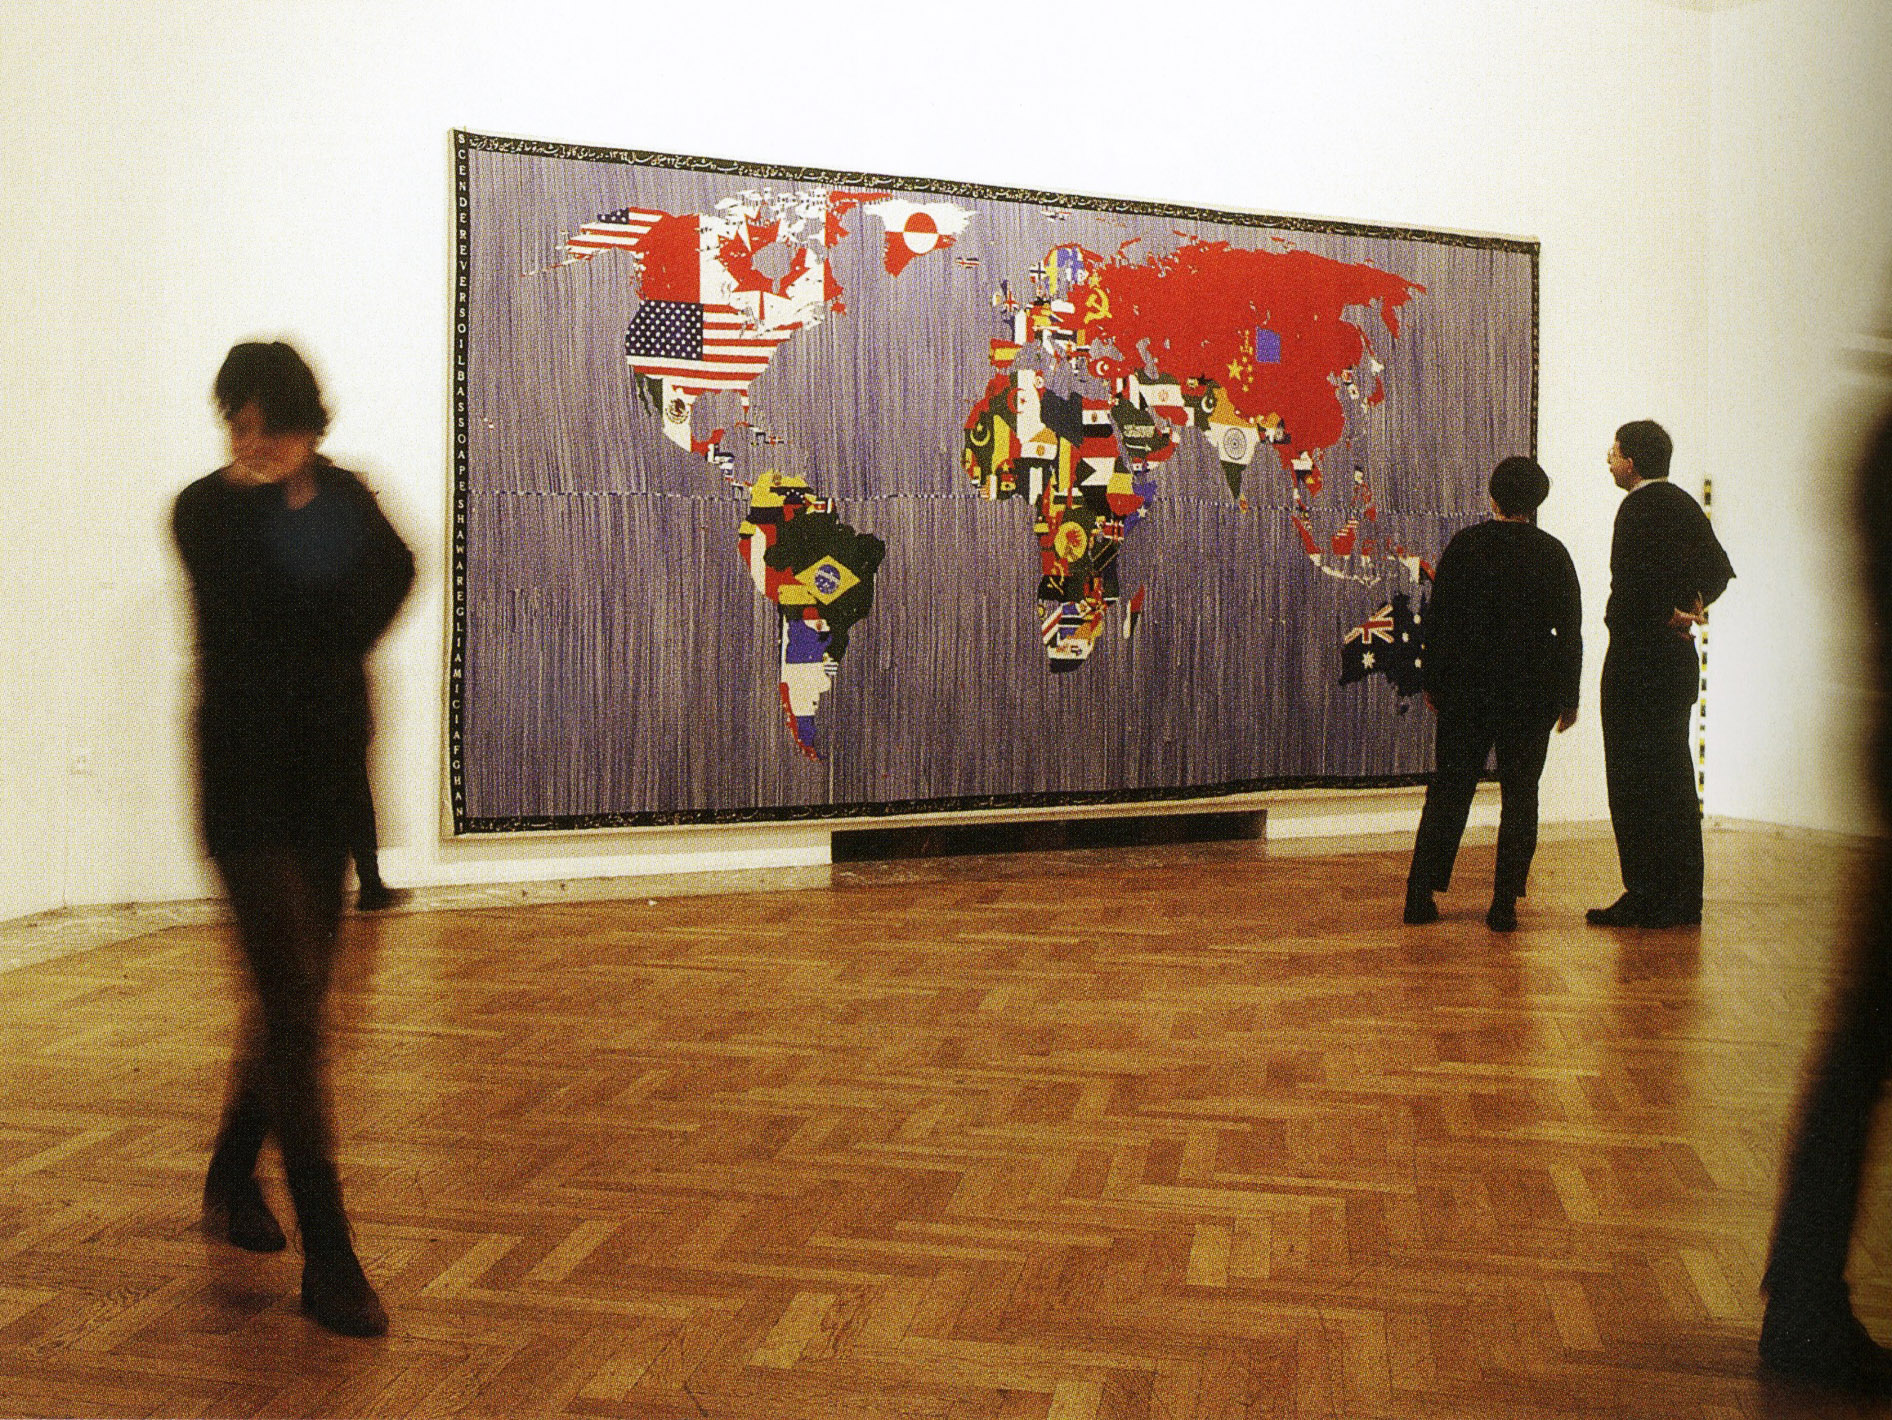   Nous voici, All of Us : Works by Boetti, Cadere. Photo Philippe De Gobert. 